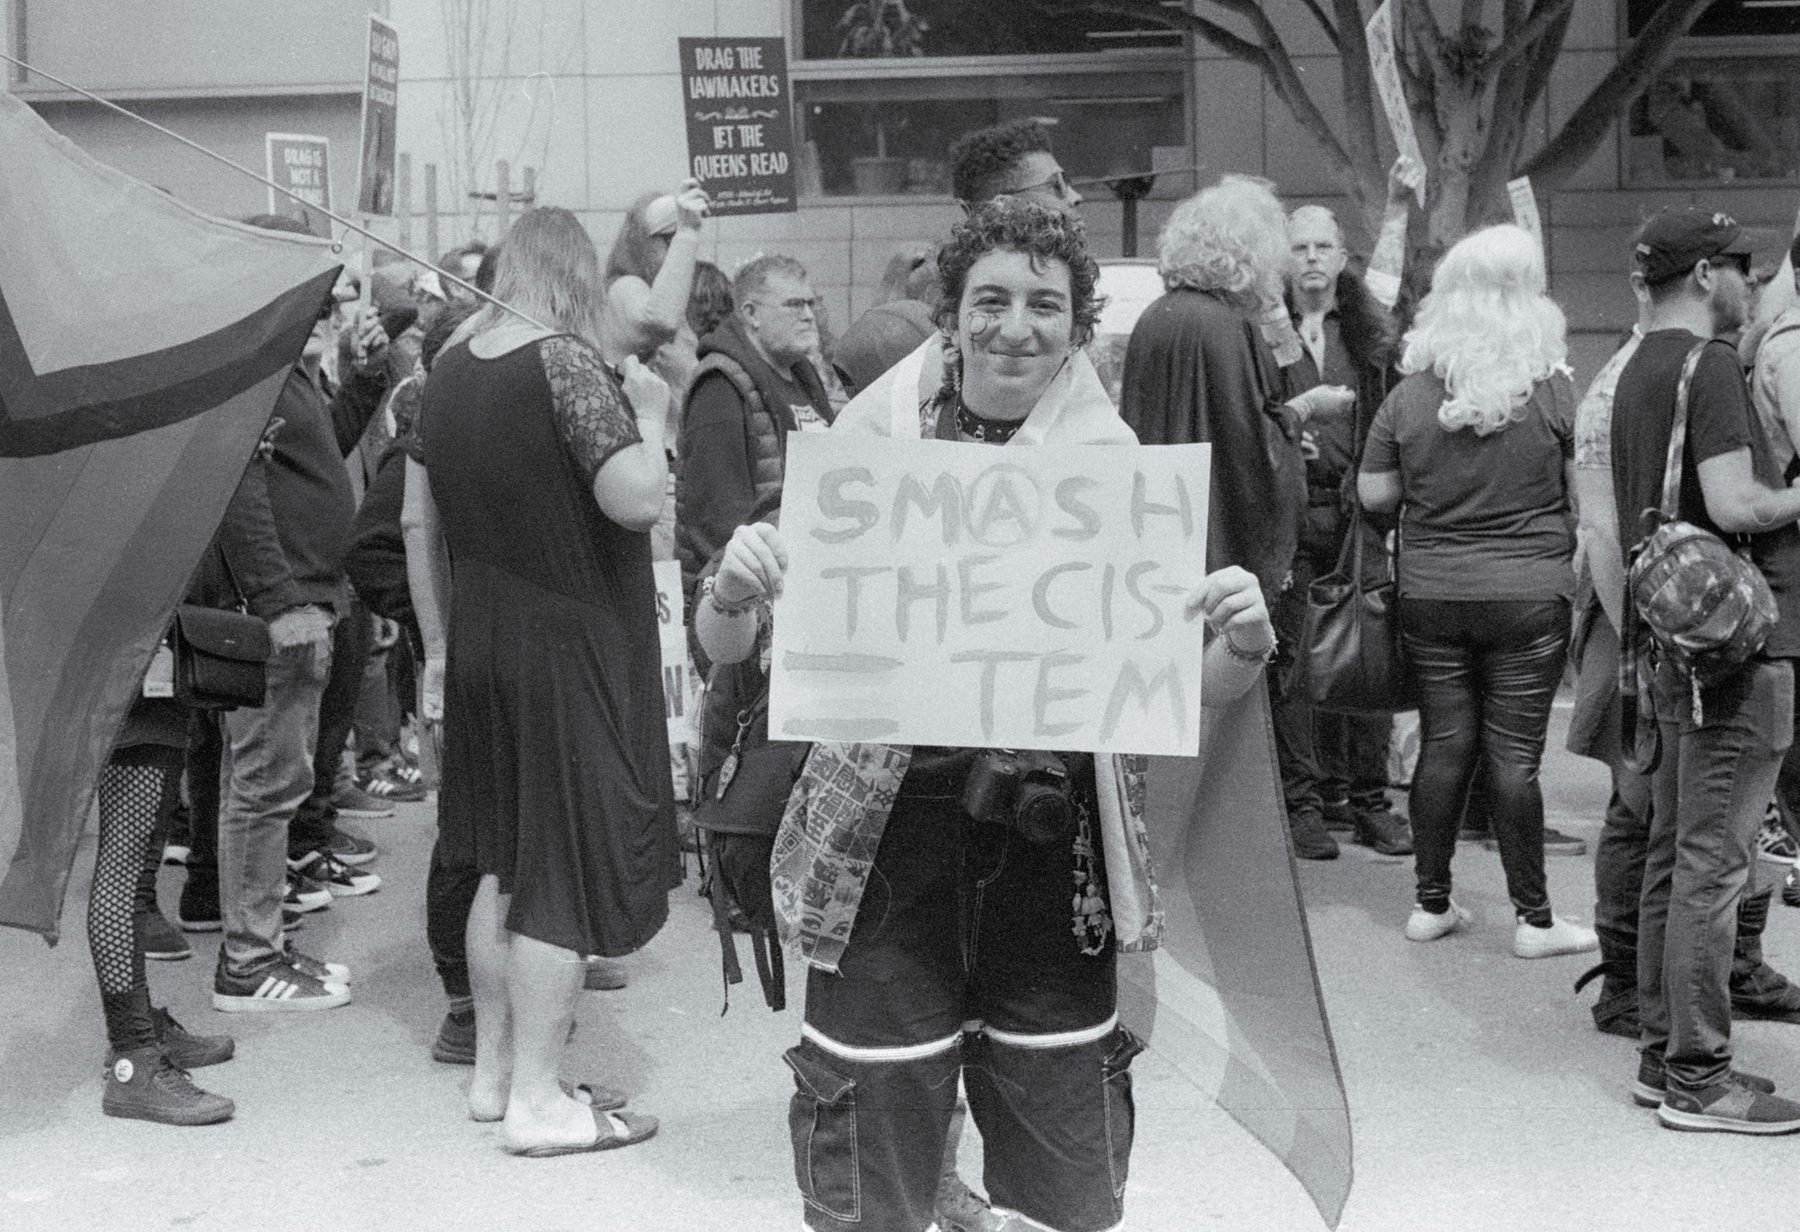 a scan of a black and white photo showing a person holding a sign that says Smash the Cistem